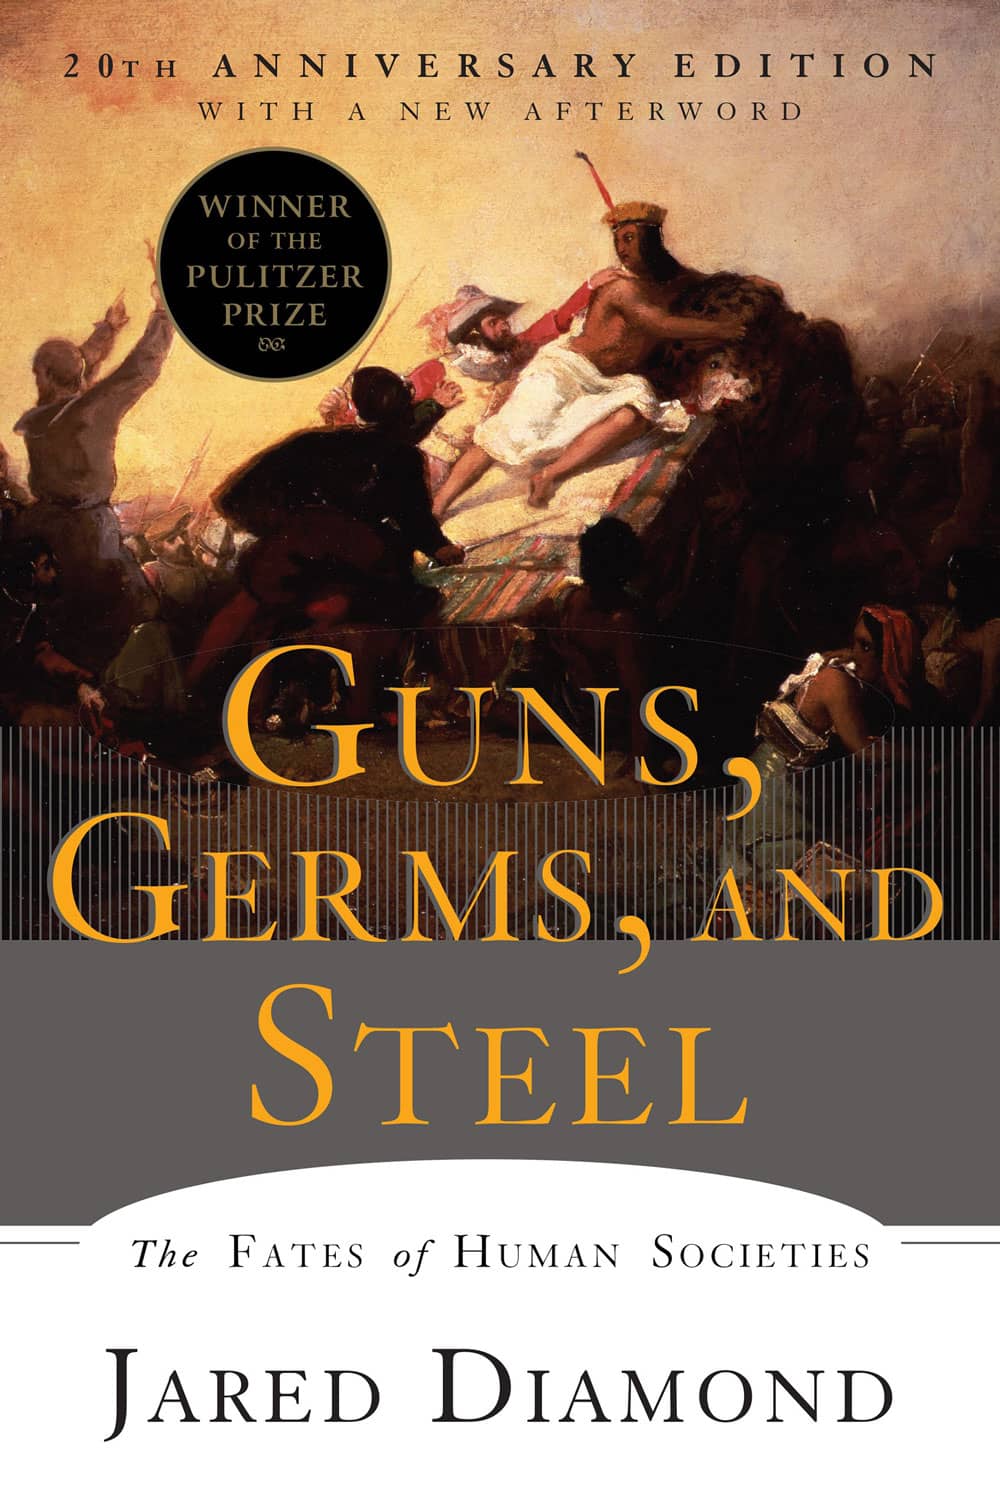 The cover of Guns, Germs, and Steel